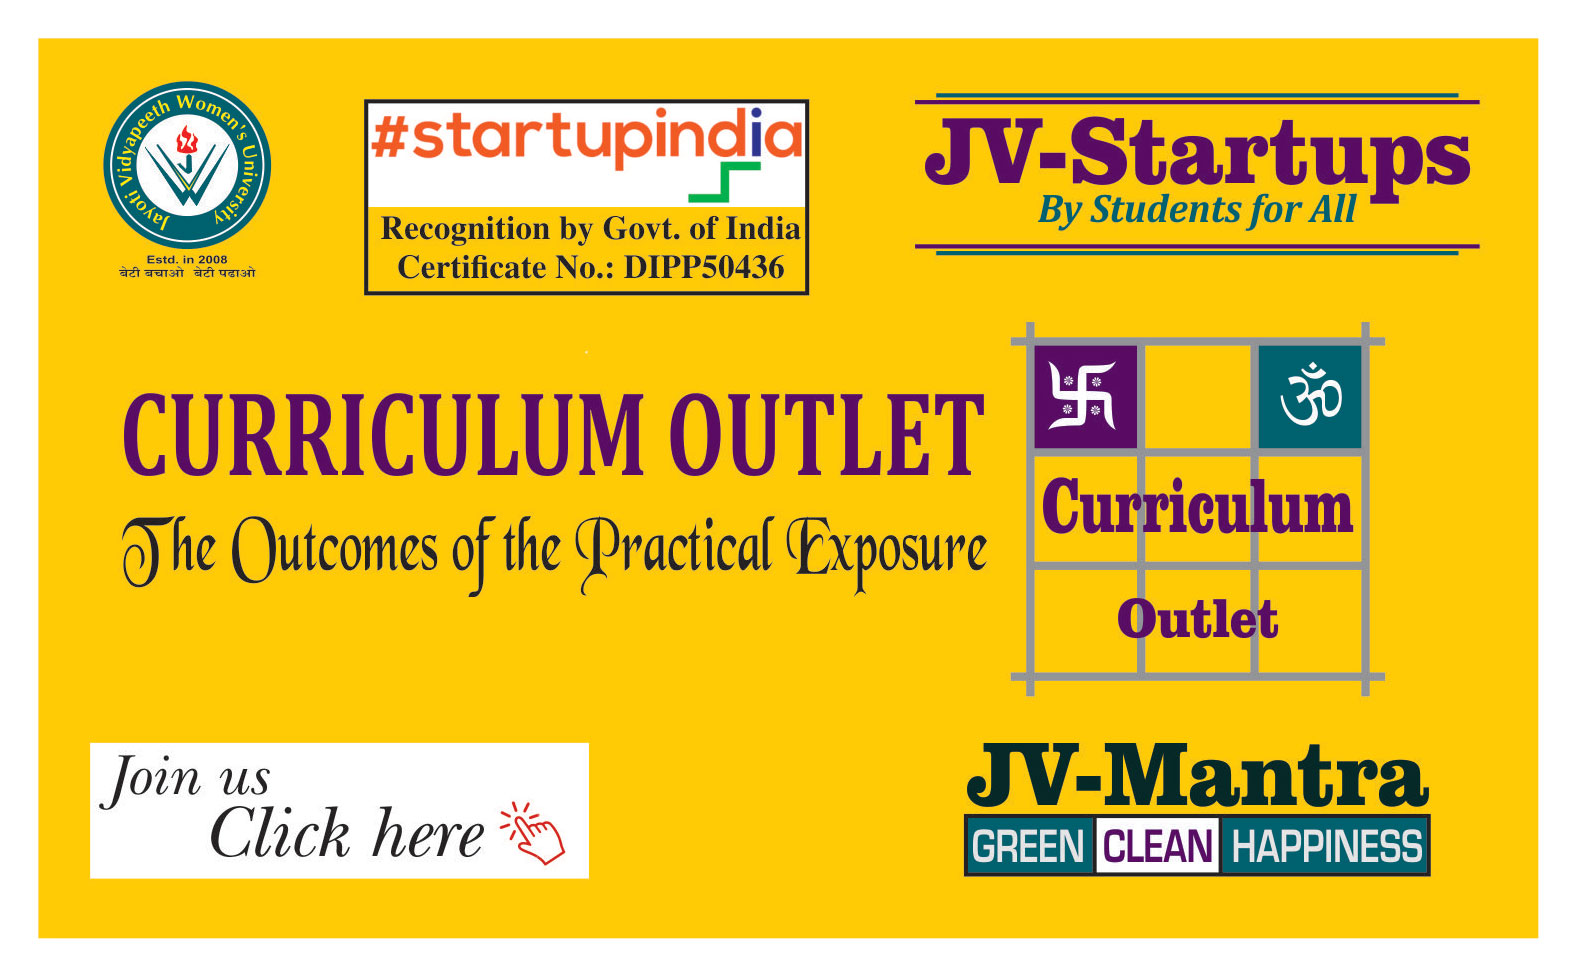 Curriculum Outlet